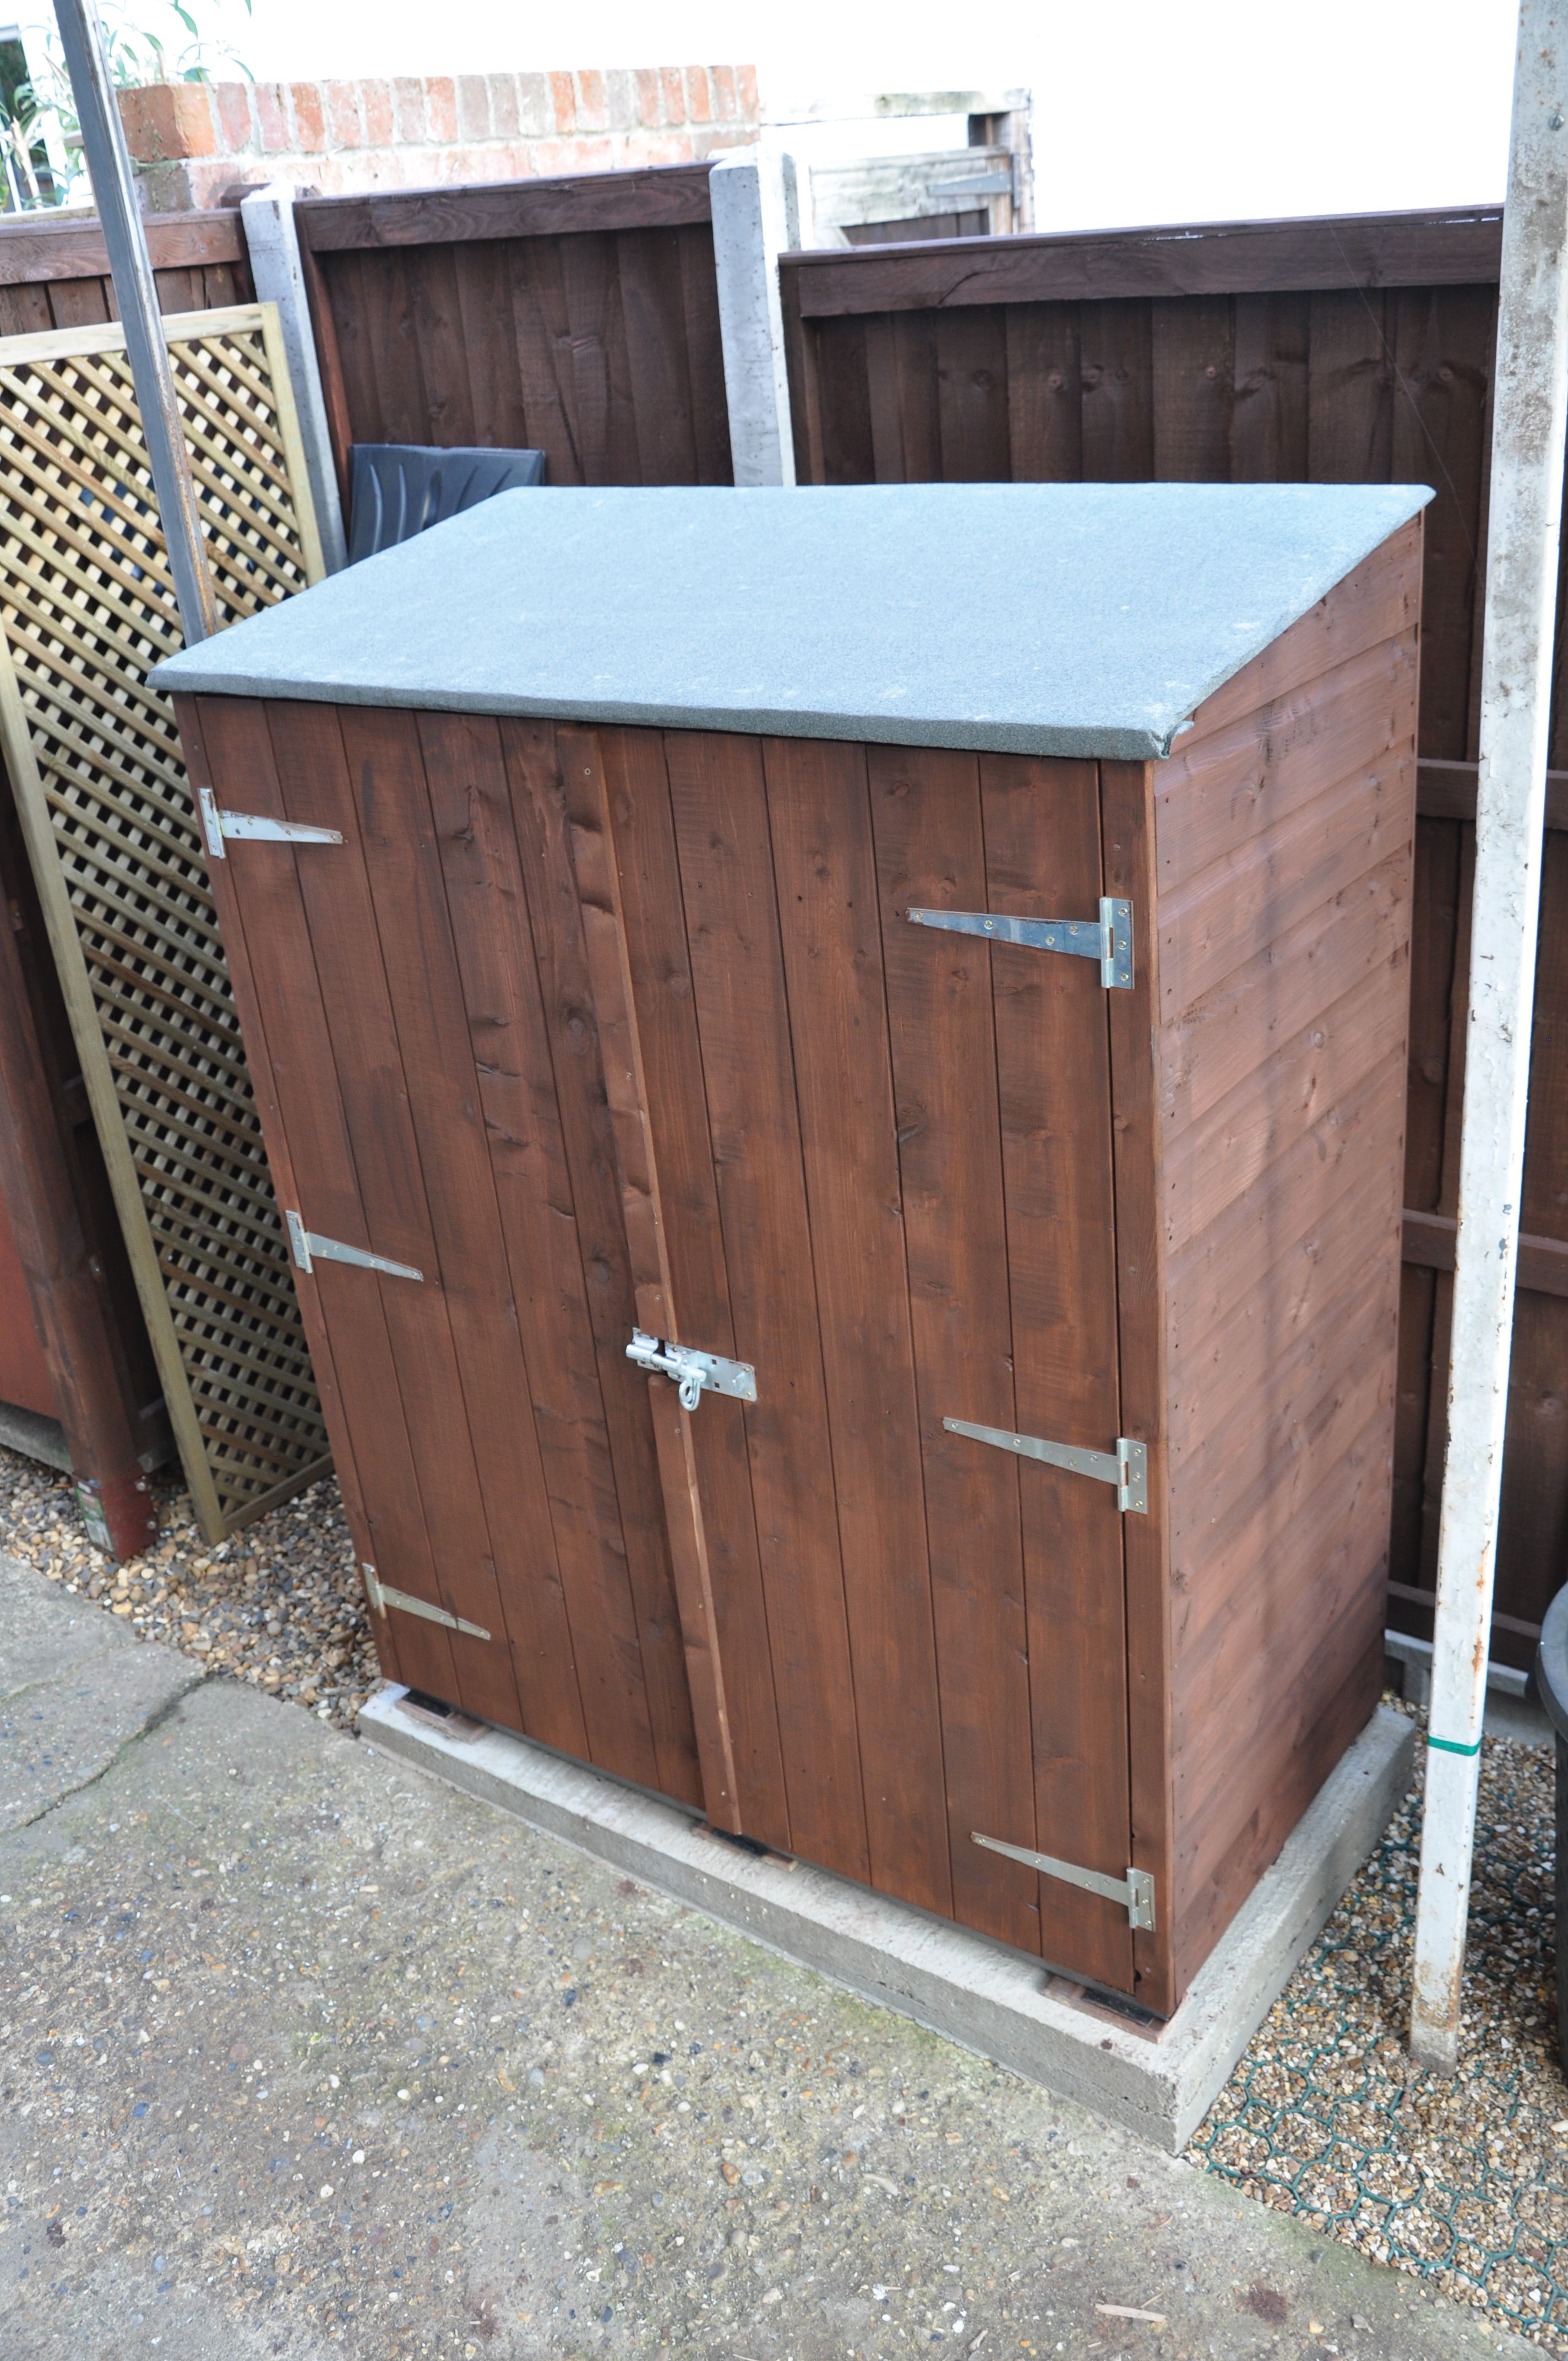 Image of Shire 4 x 2ft Shiplap Timber Garden Store Shed